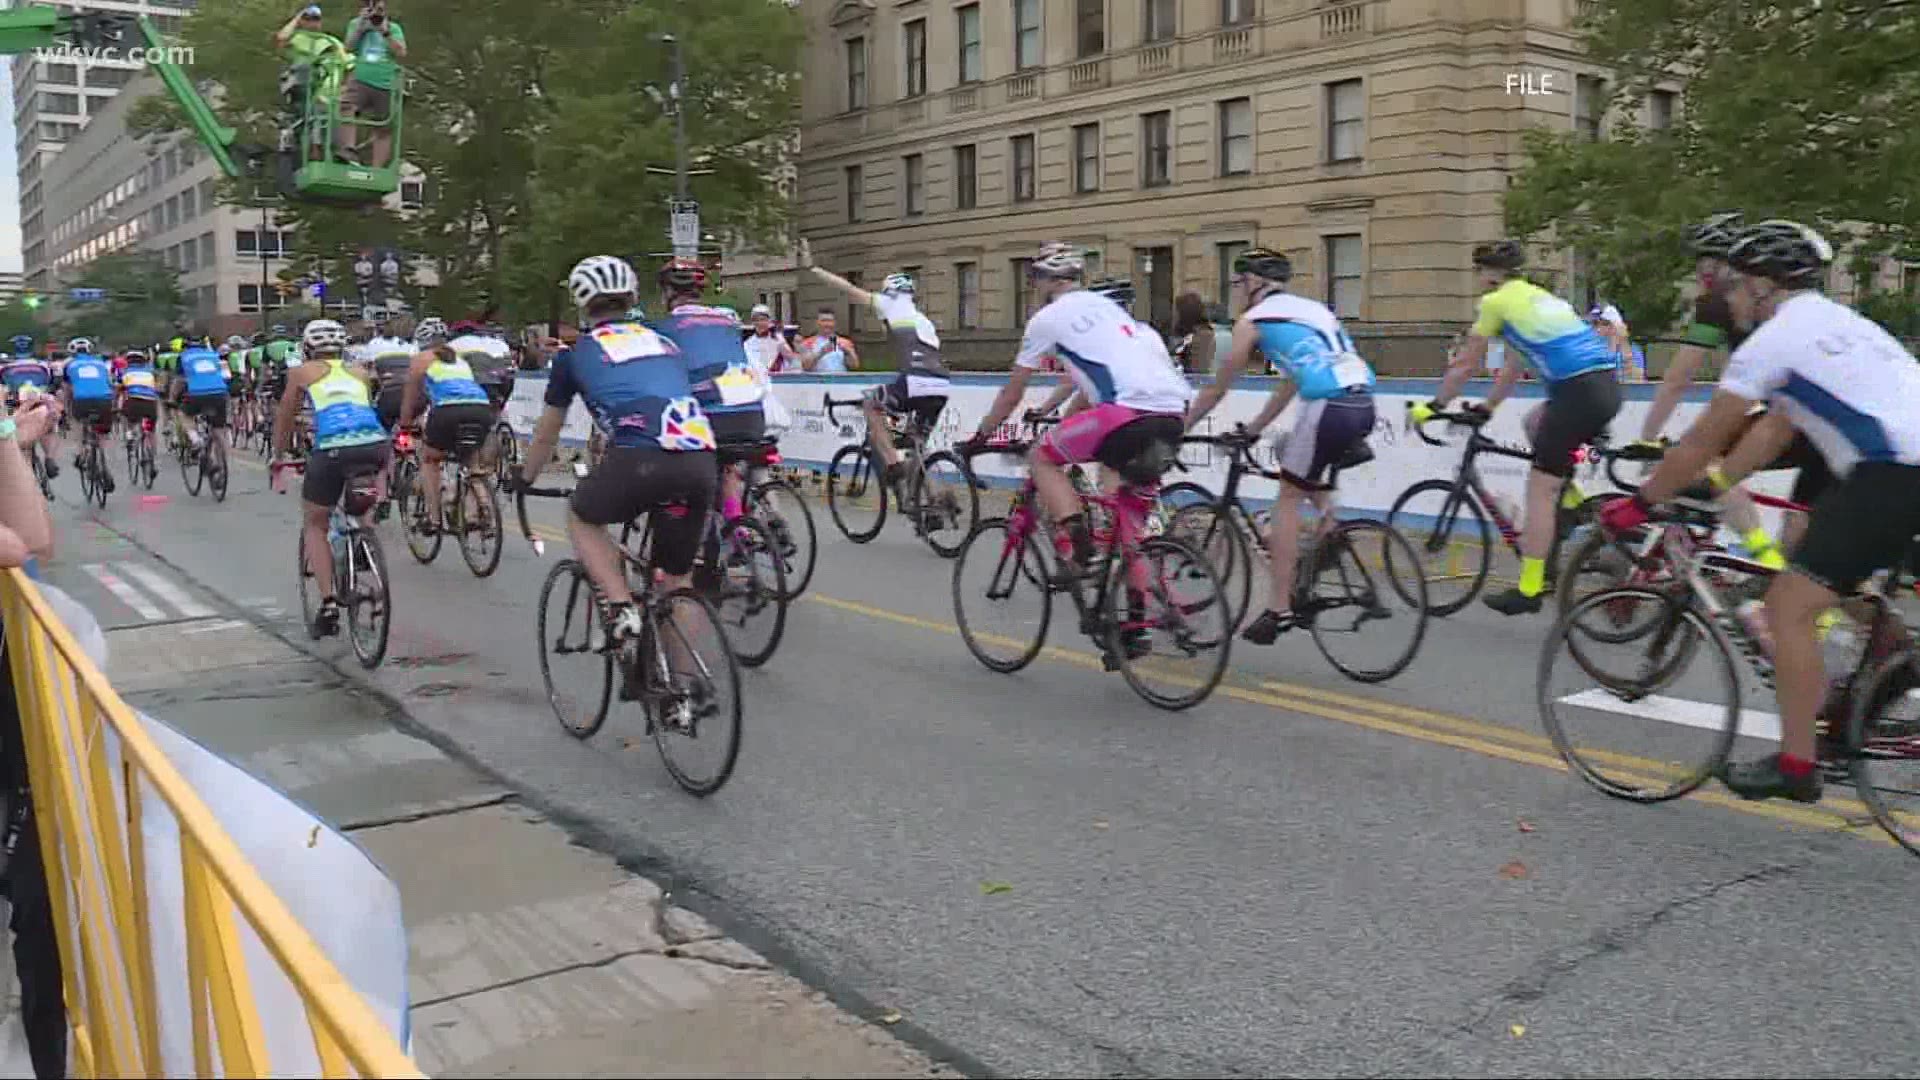 While typically held in July, this year’s VeloSano Bike to Cure is set for Sept. 10-12 with plans for an in-person event in Cleveland.